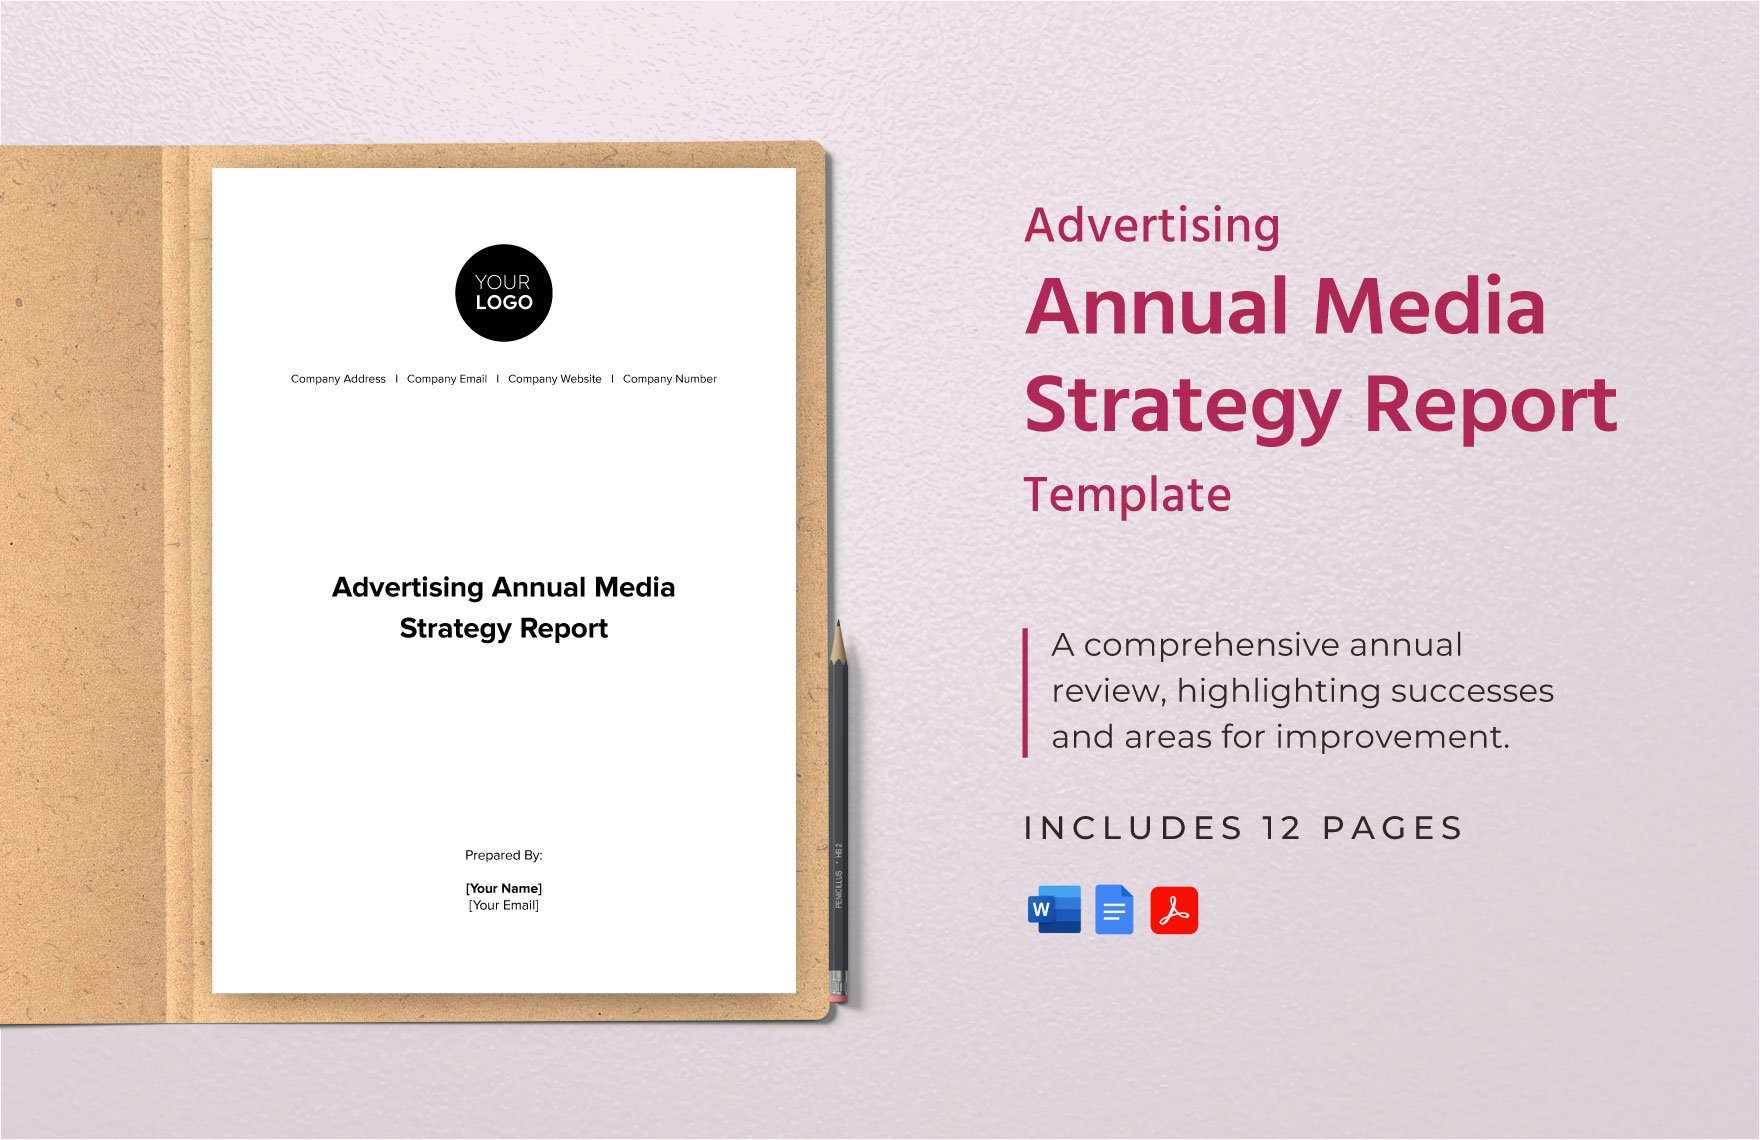 Advertising Annual Media Strategy Report Template